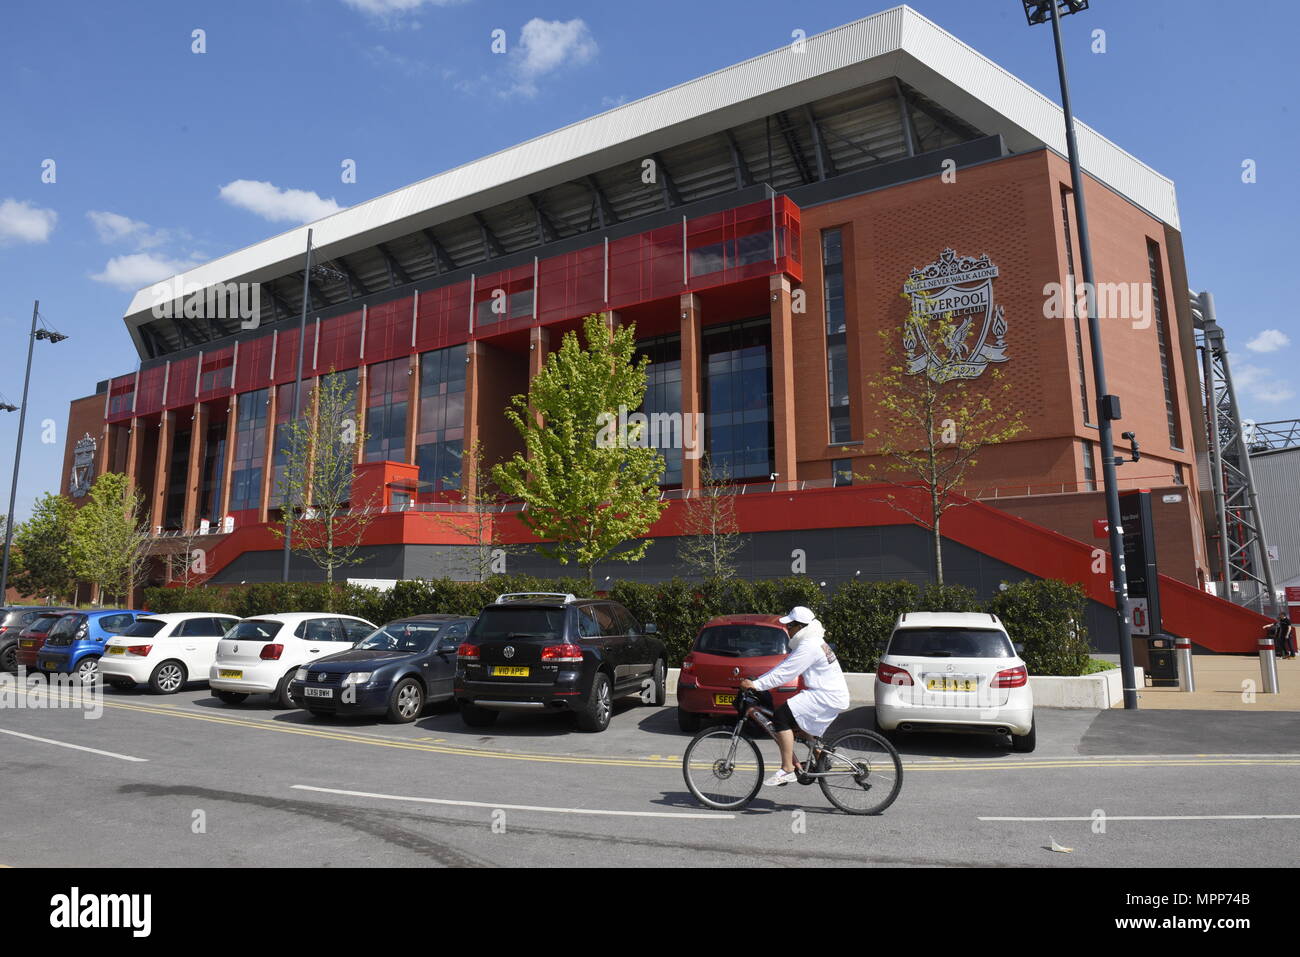 Liverpool, UK 24th May 2018.The Main Stand at Anfield. Decorations and flags go up on houses and pubs near Anfield, the home ground of Liverpool Football Club. Fans are preparing for their teams appearance in the Champions League Final on Saturday 26th May 2018. It is first time Liverpool FC have appeared in the final since 2005. Credit: David Colbran/Alamy Live News Stock Photo